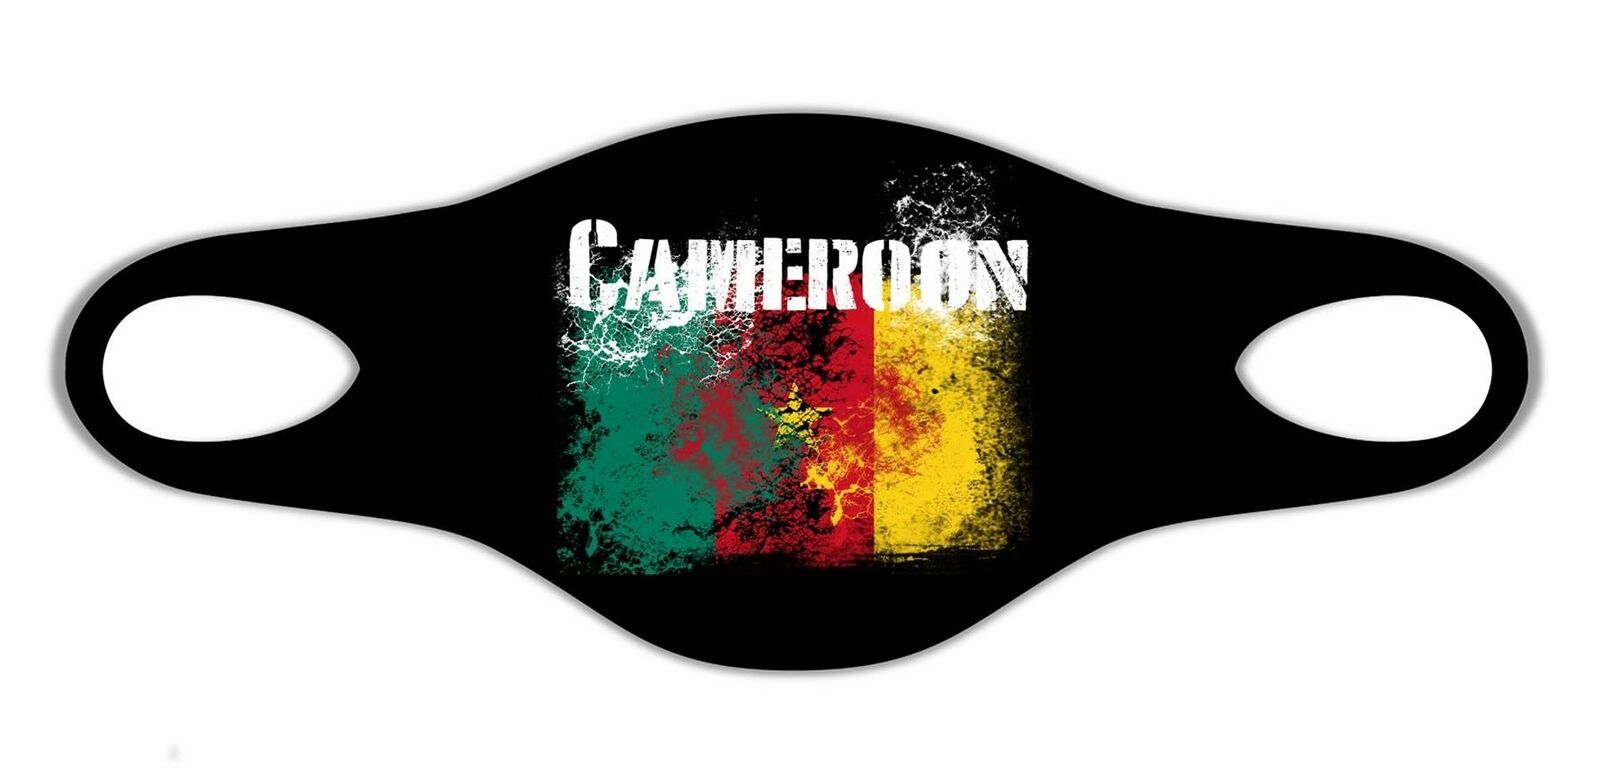 Cameroon National Flag Soft Face Mask Protective Reusable washable Breathable